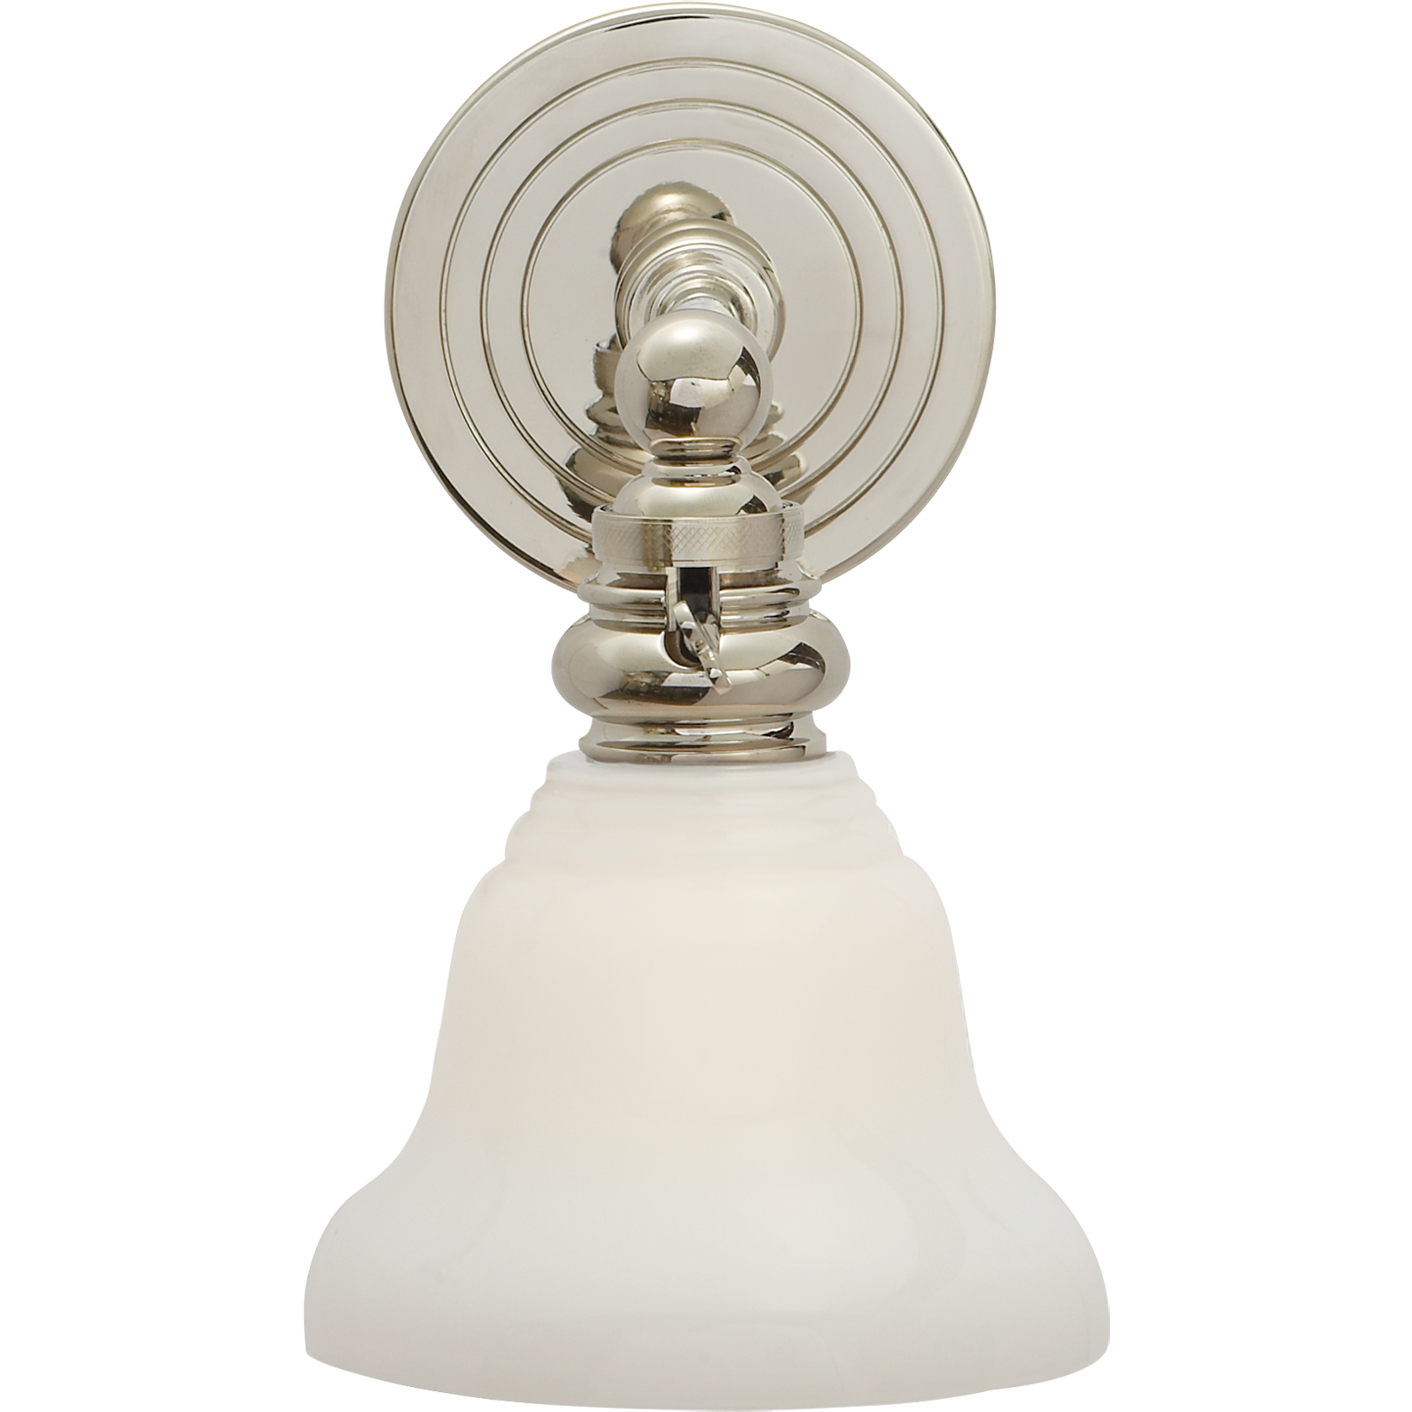 Boston Functional Single Light with White Glass